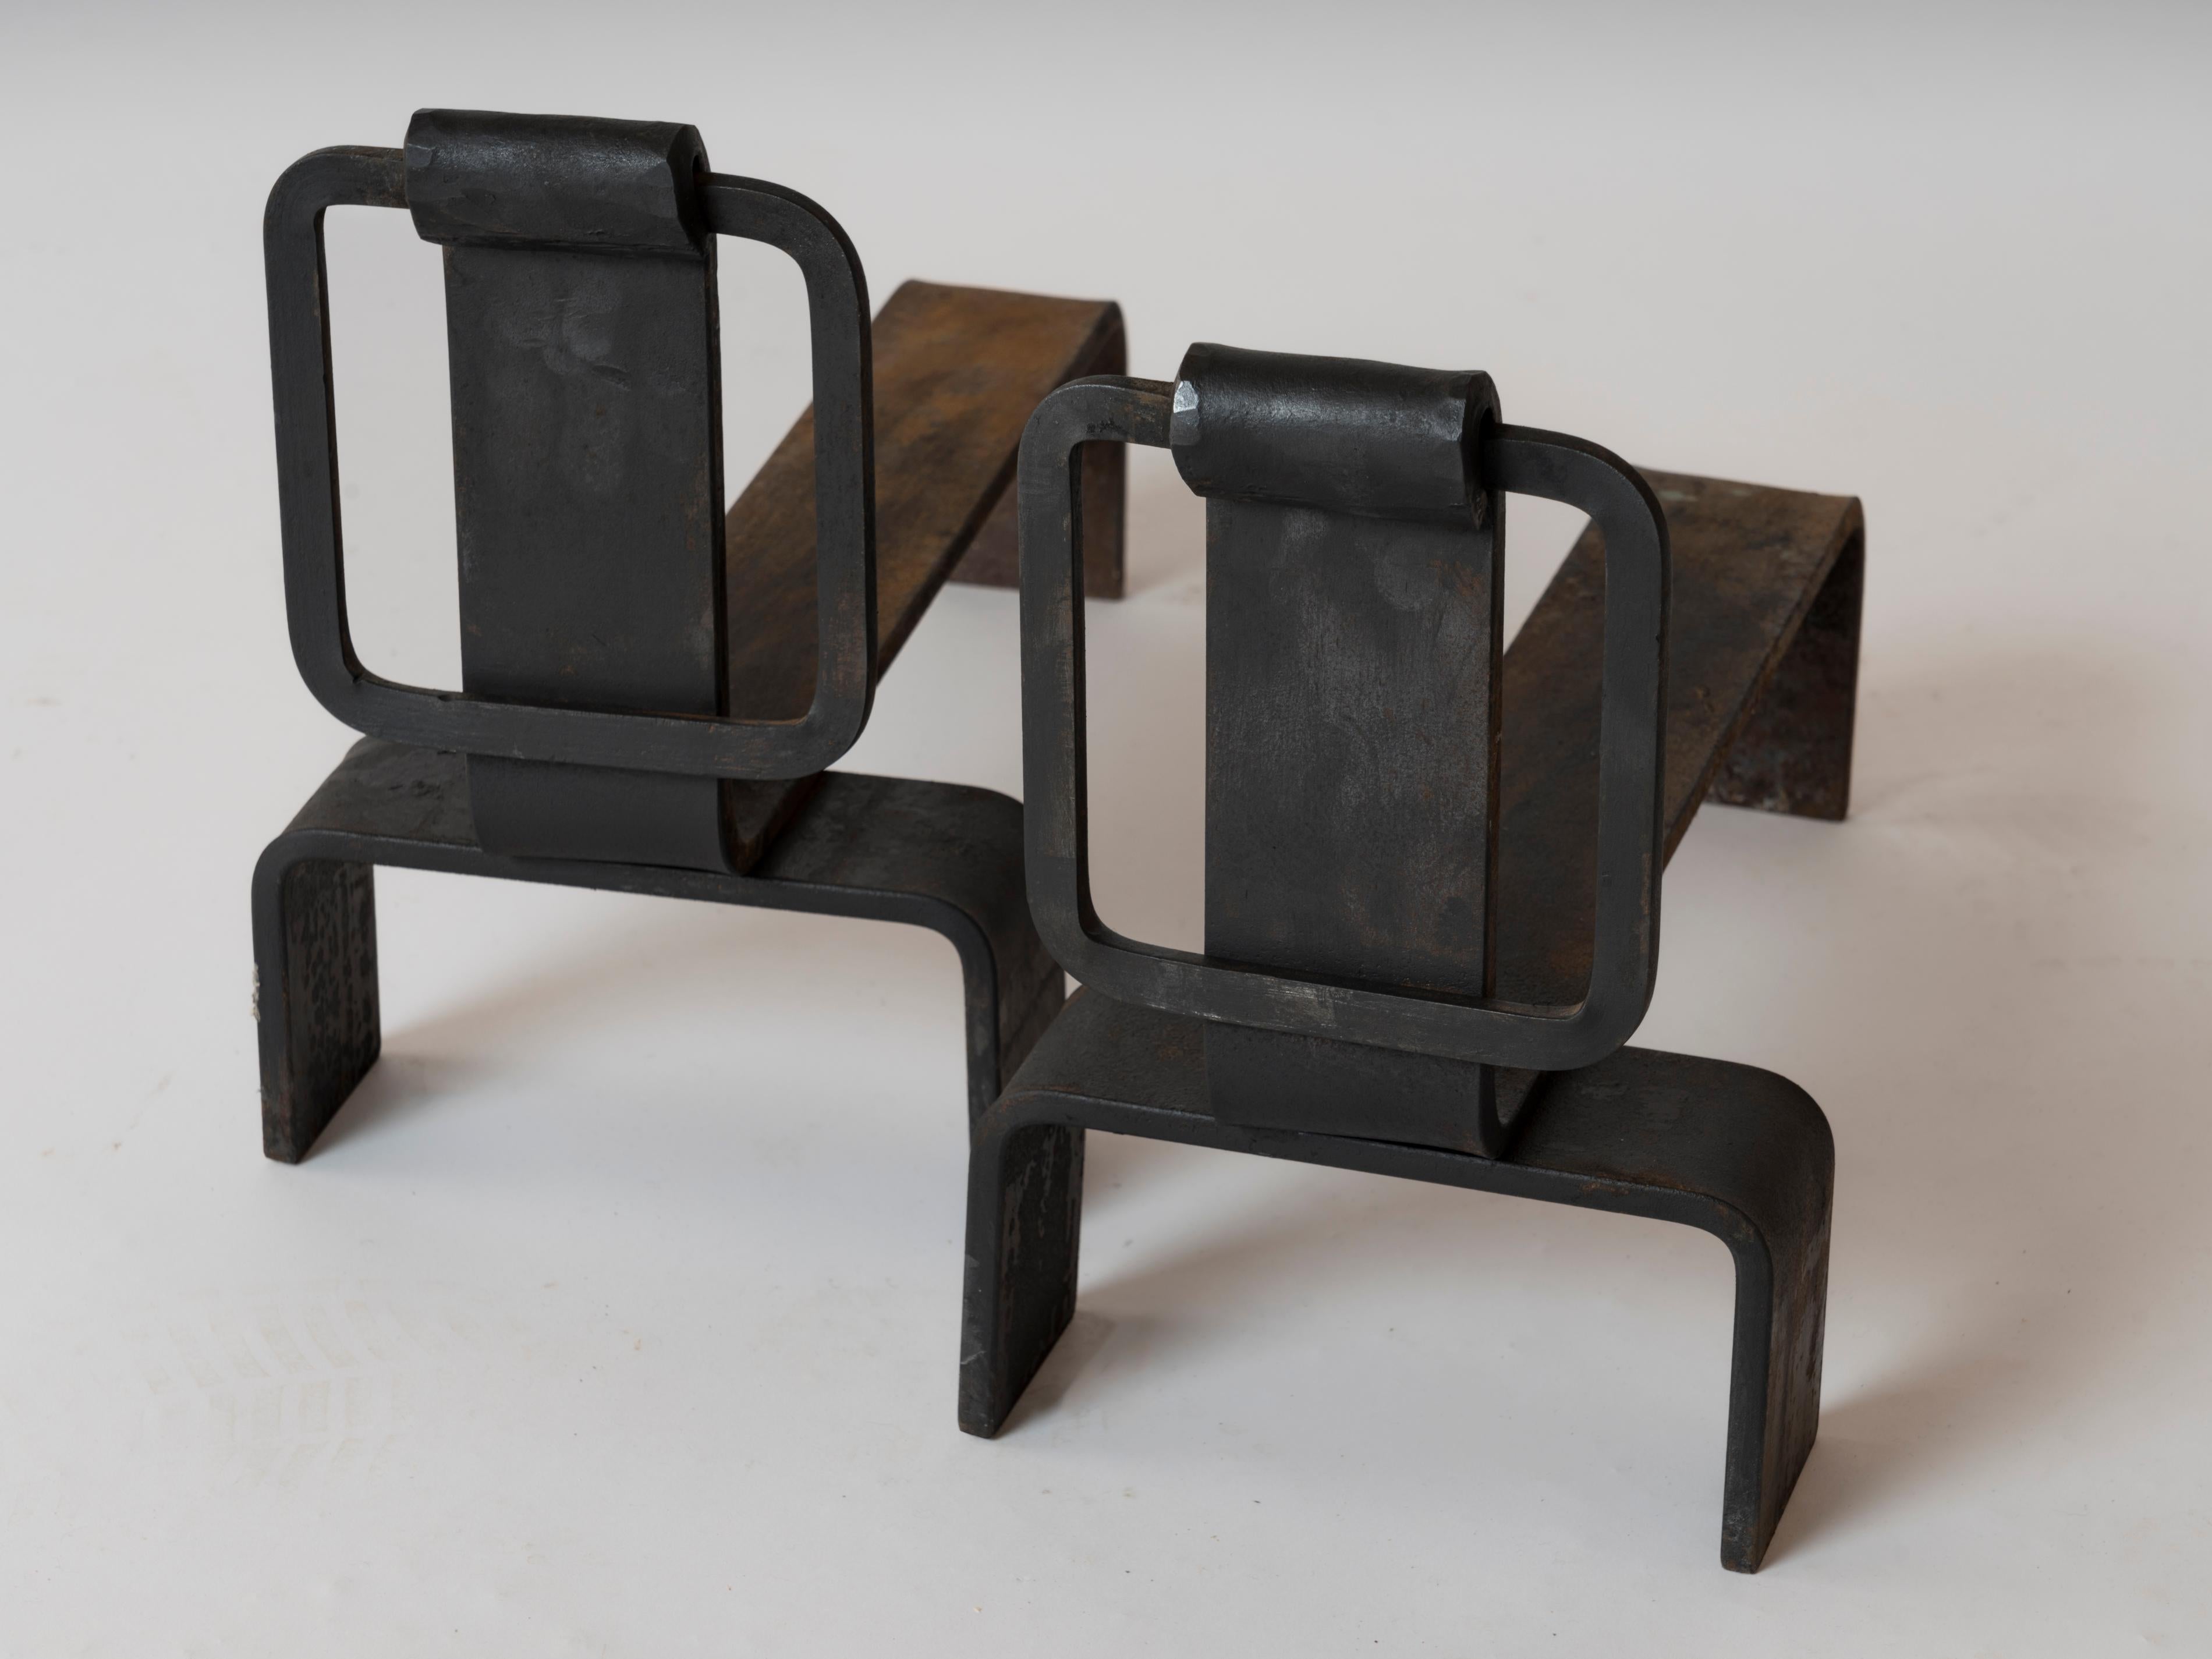 Pair of minimalist cast steel andirons whith square motif buckle on the fron side.
These andirons will ship from France and can be returned to either France or to a LIC NY location.
Price does not include shipping nor possible customs related